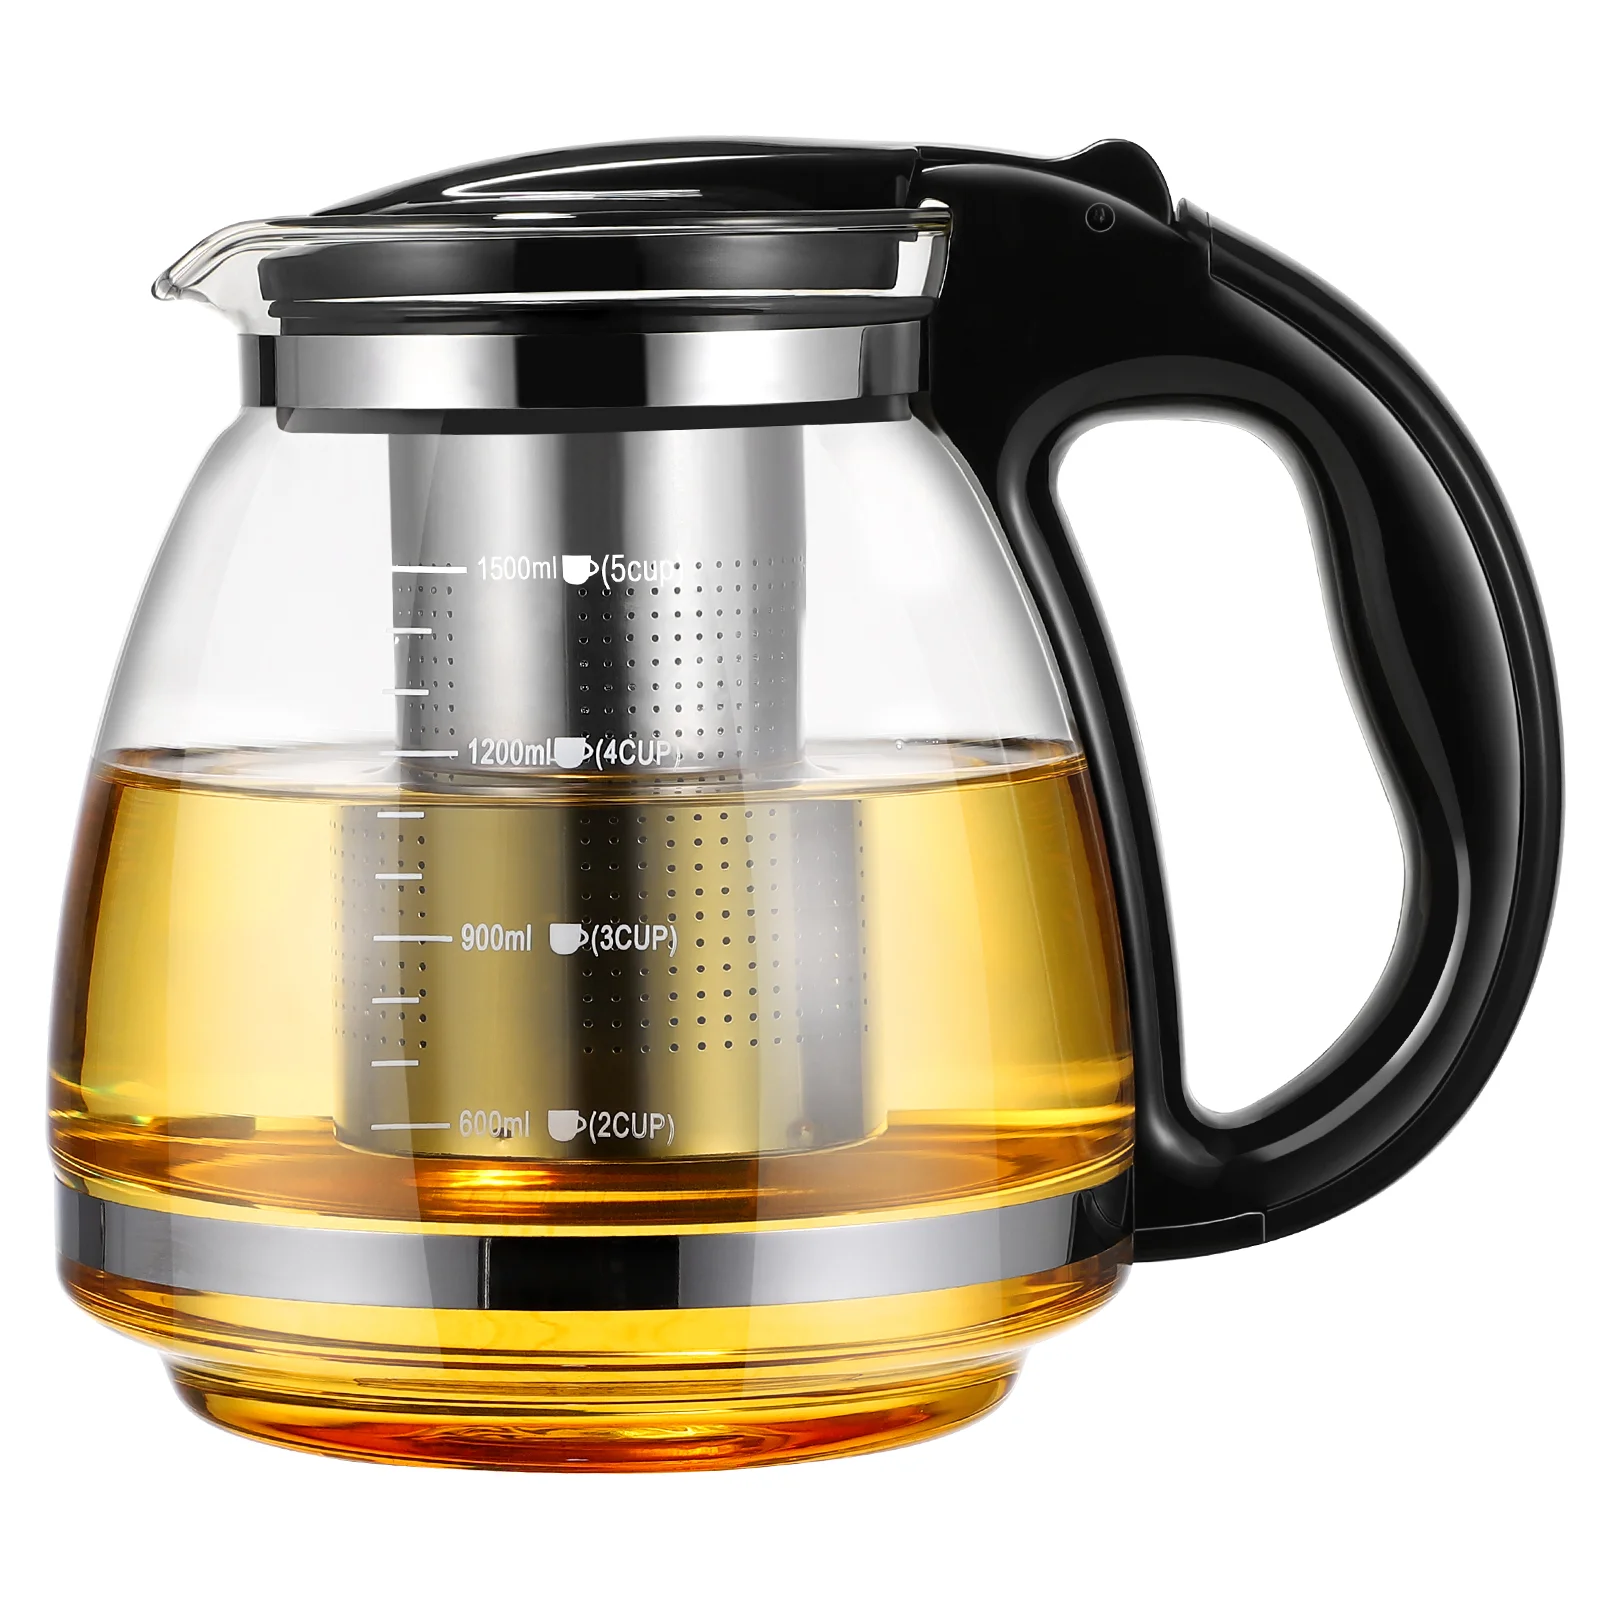 

Small Glass Teapot Stovetop Safe Removable Infuser Kungfu Teaware Kettle Strainer Maker 1500ml Stainless Steel Water Pitcher